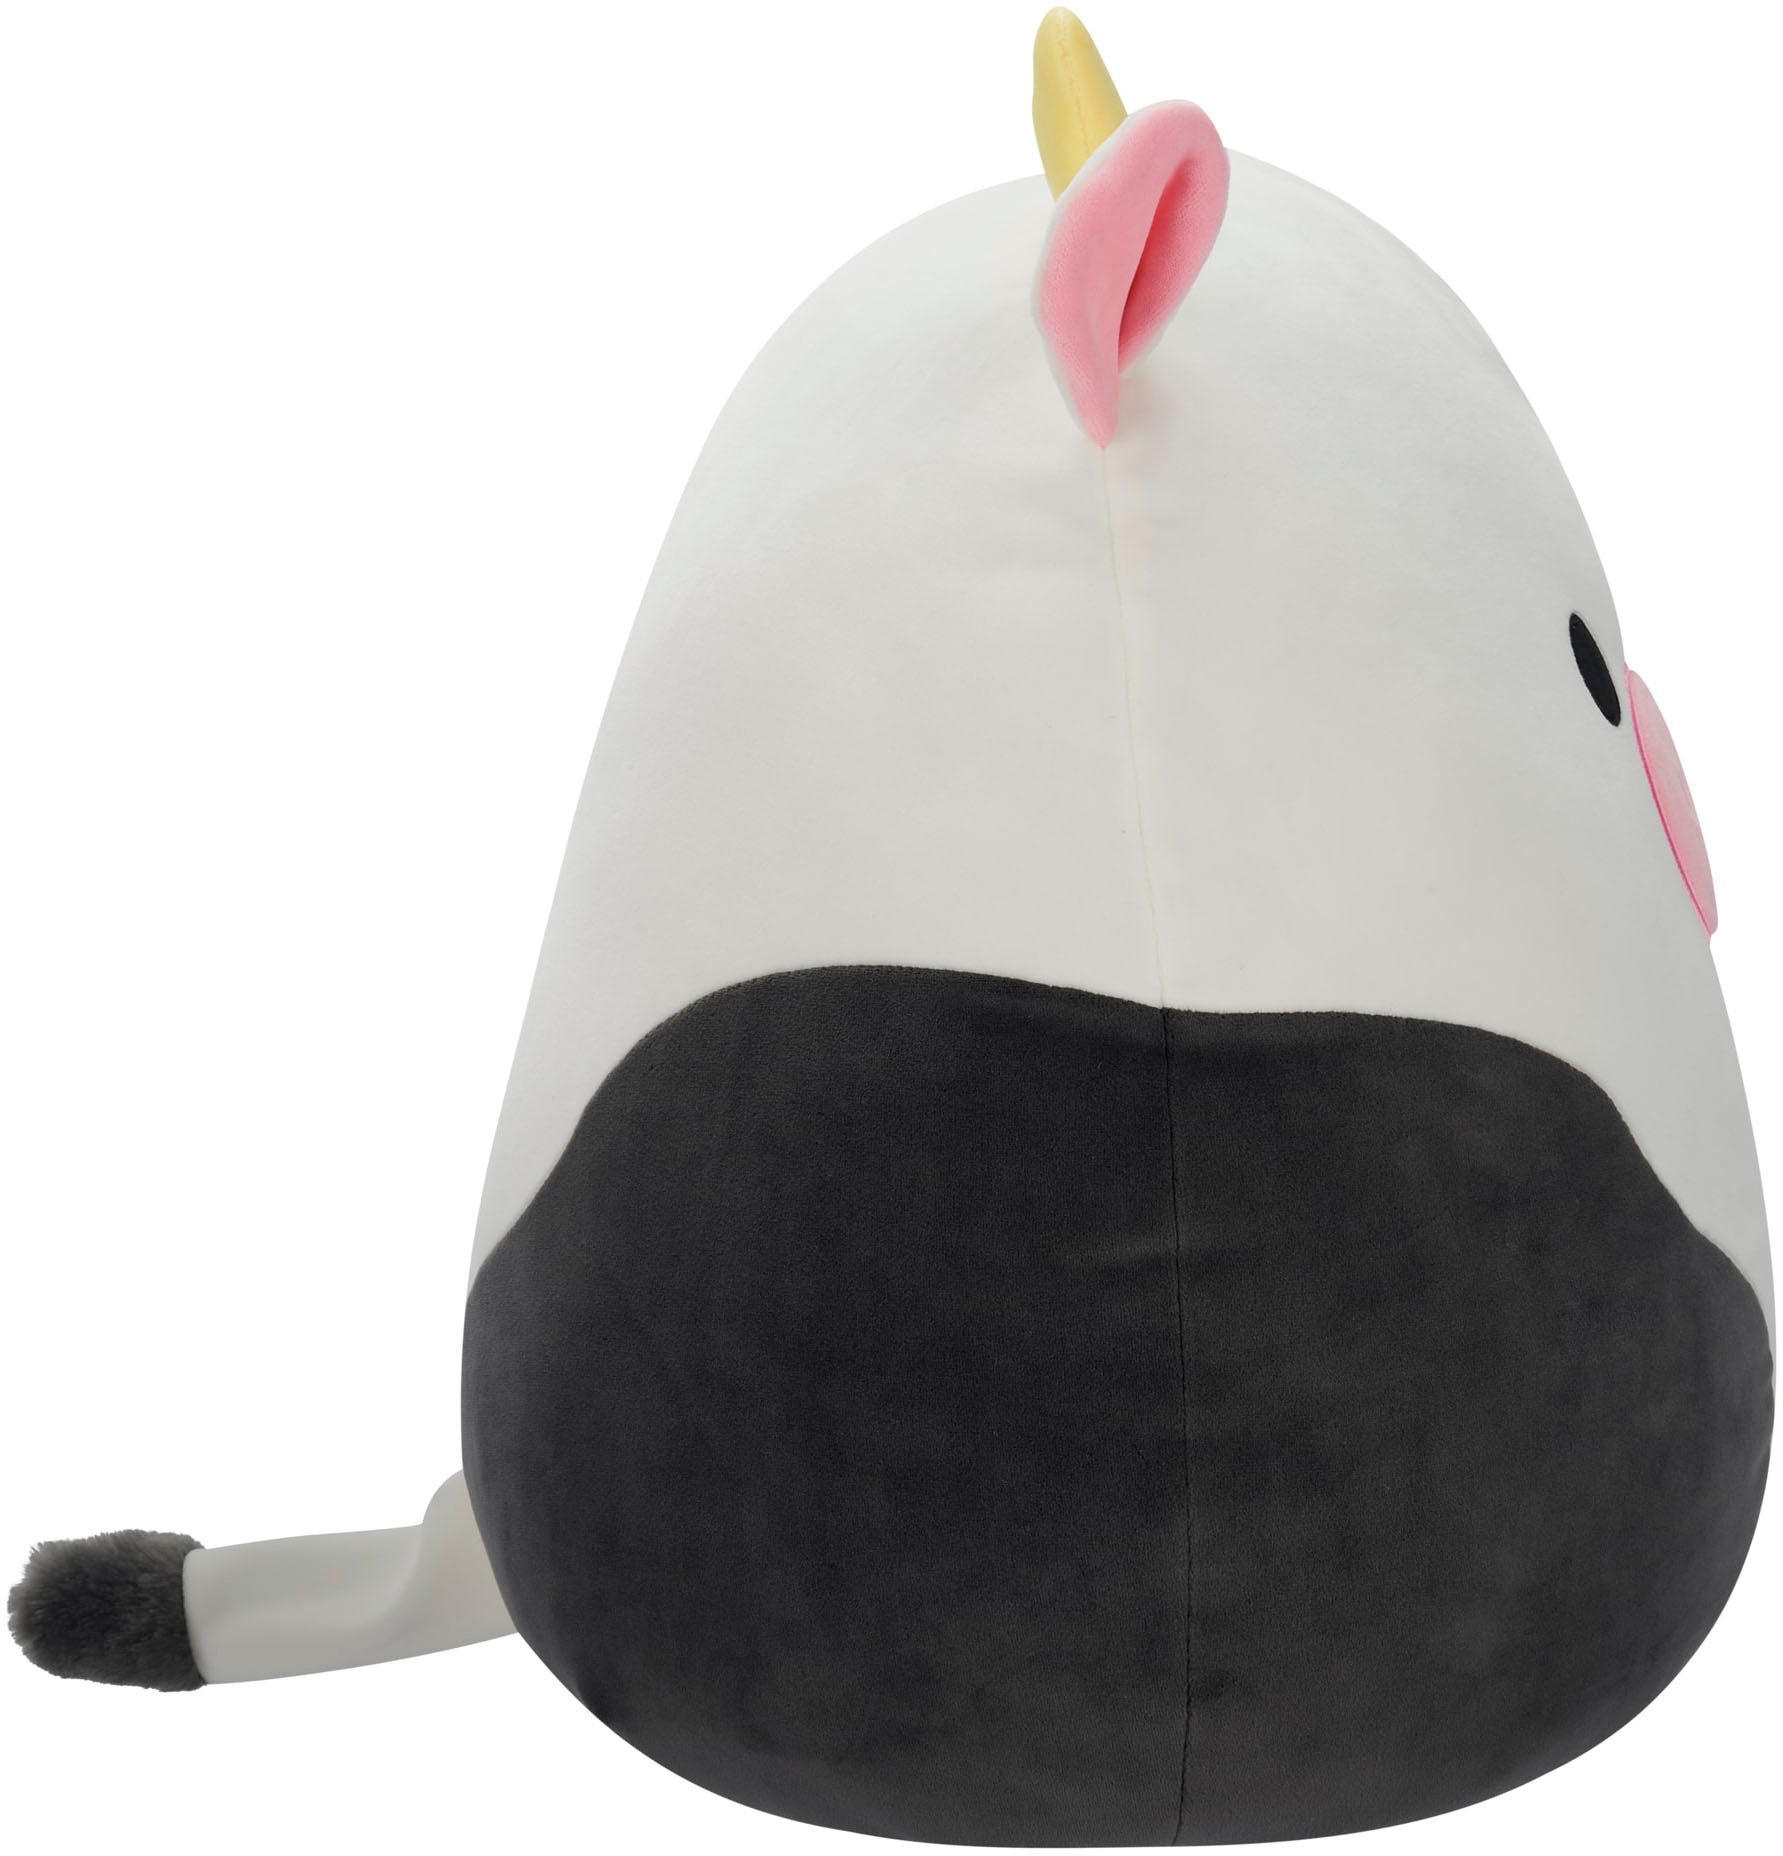 Squishmallows 16 inch Connor The Cow Plush Stuffed Animal Toy